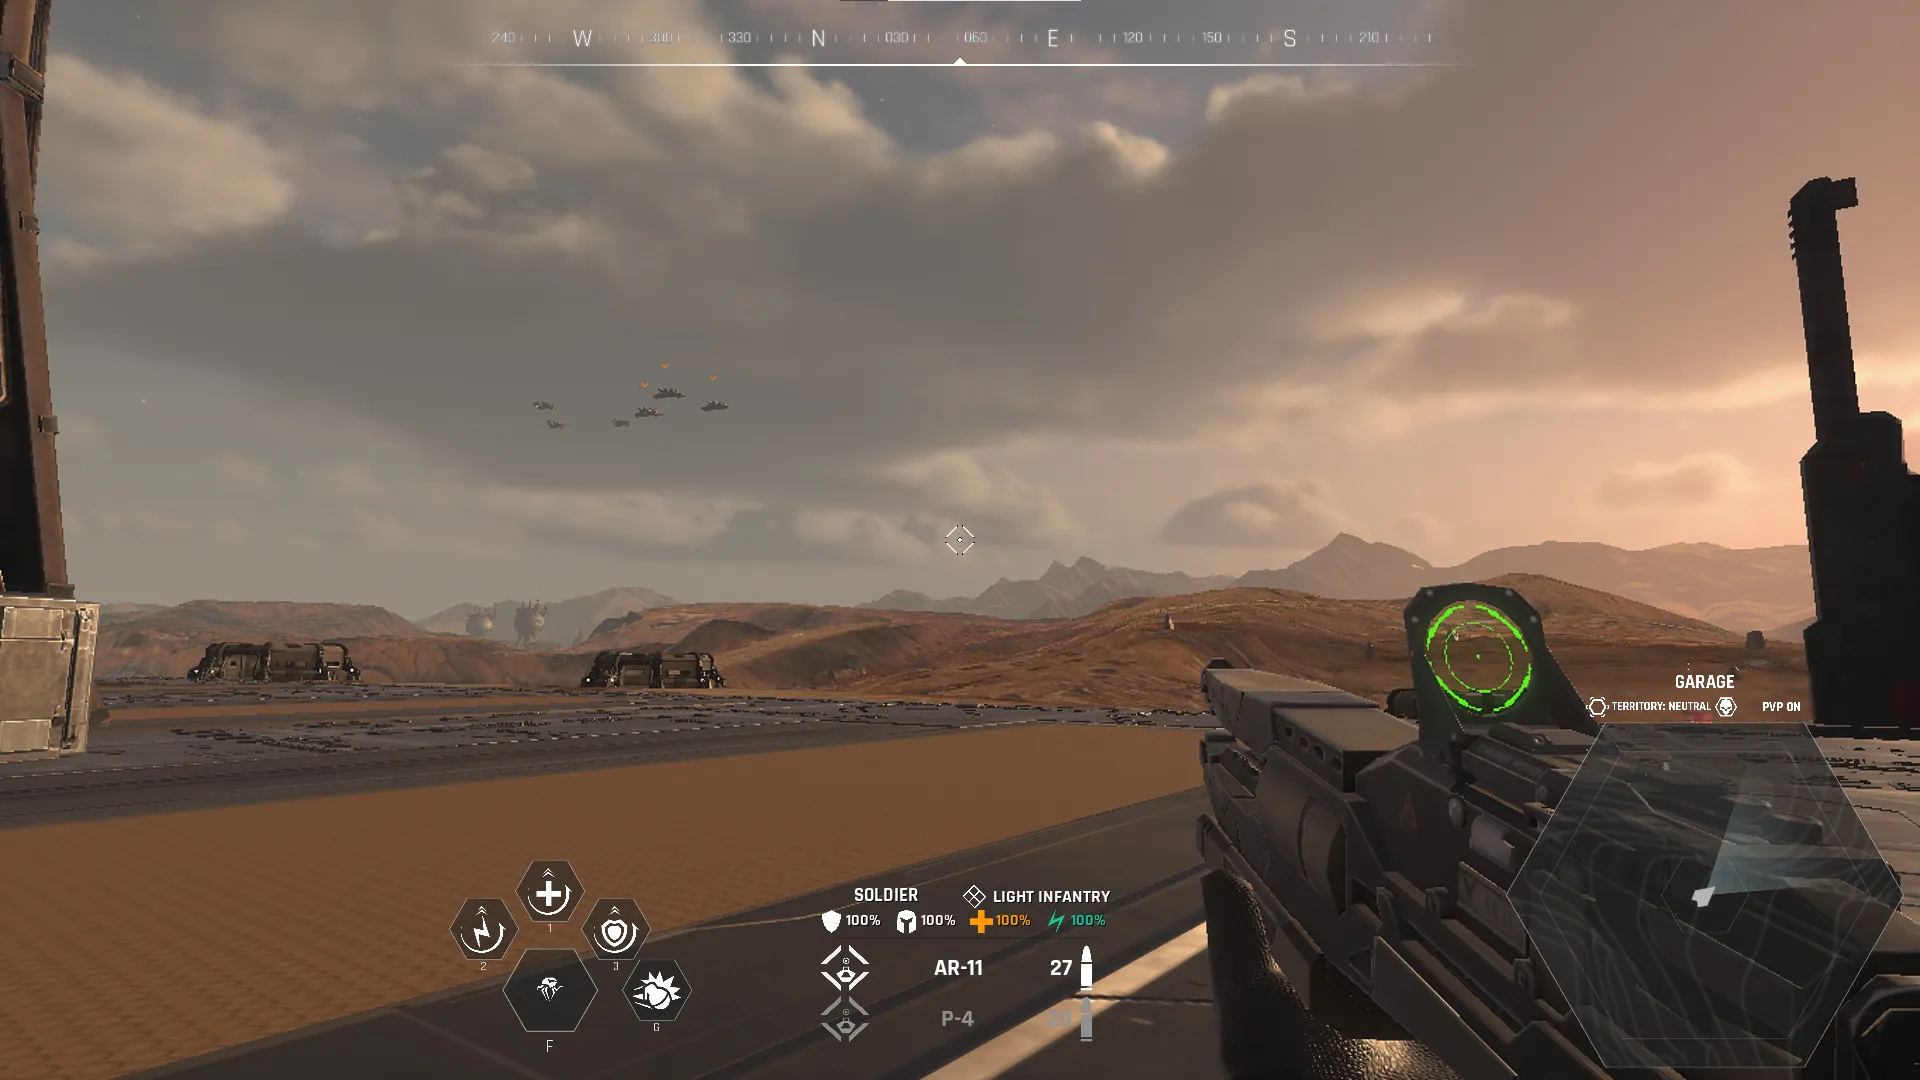 The picture shows the MetalCore Battle Interface, depicting an open-world mechanized combat game where players join factions to advance further in the game.